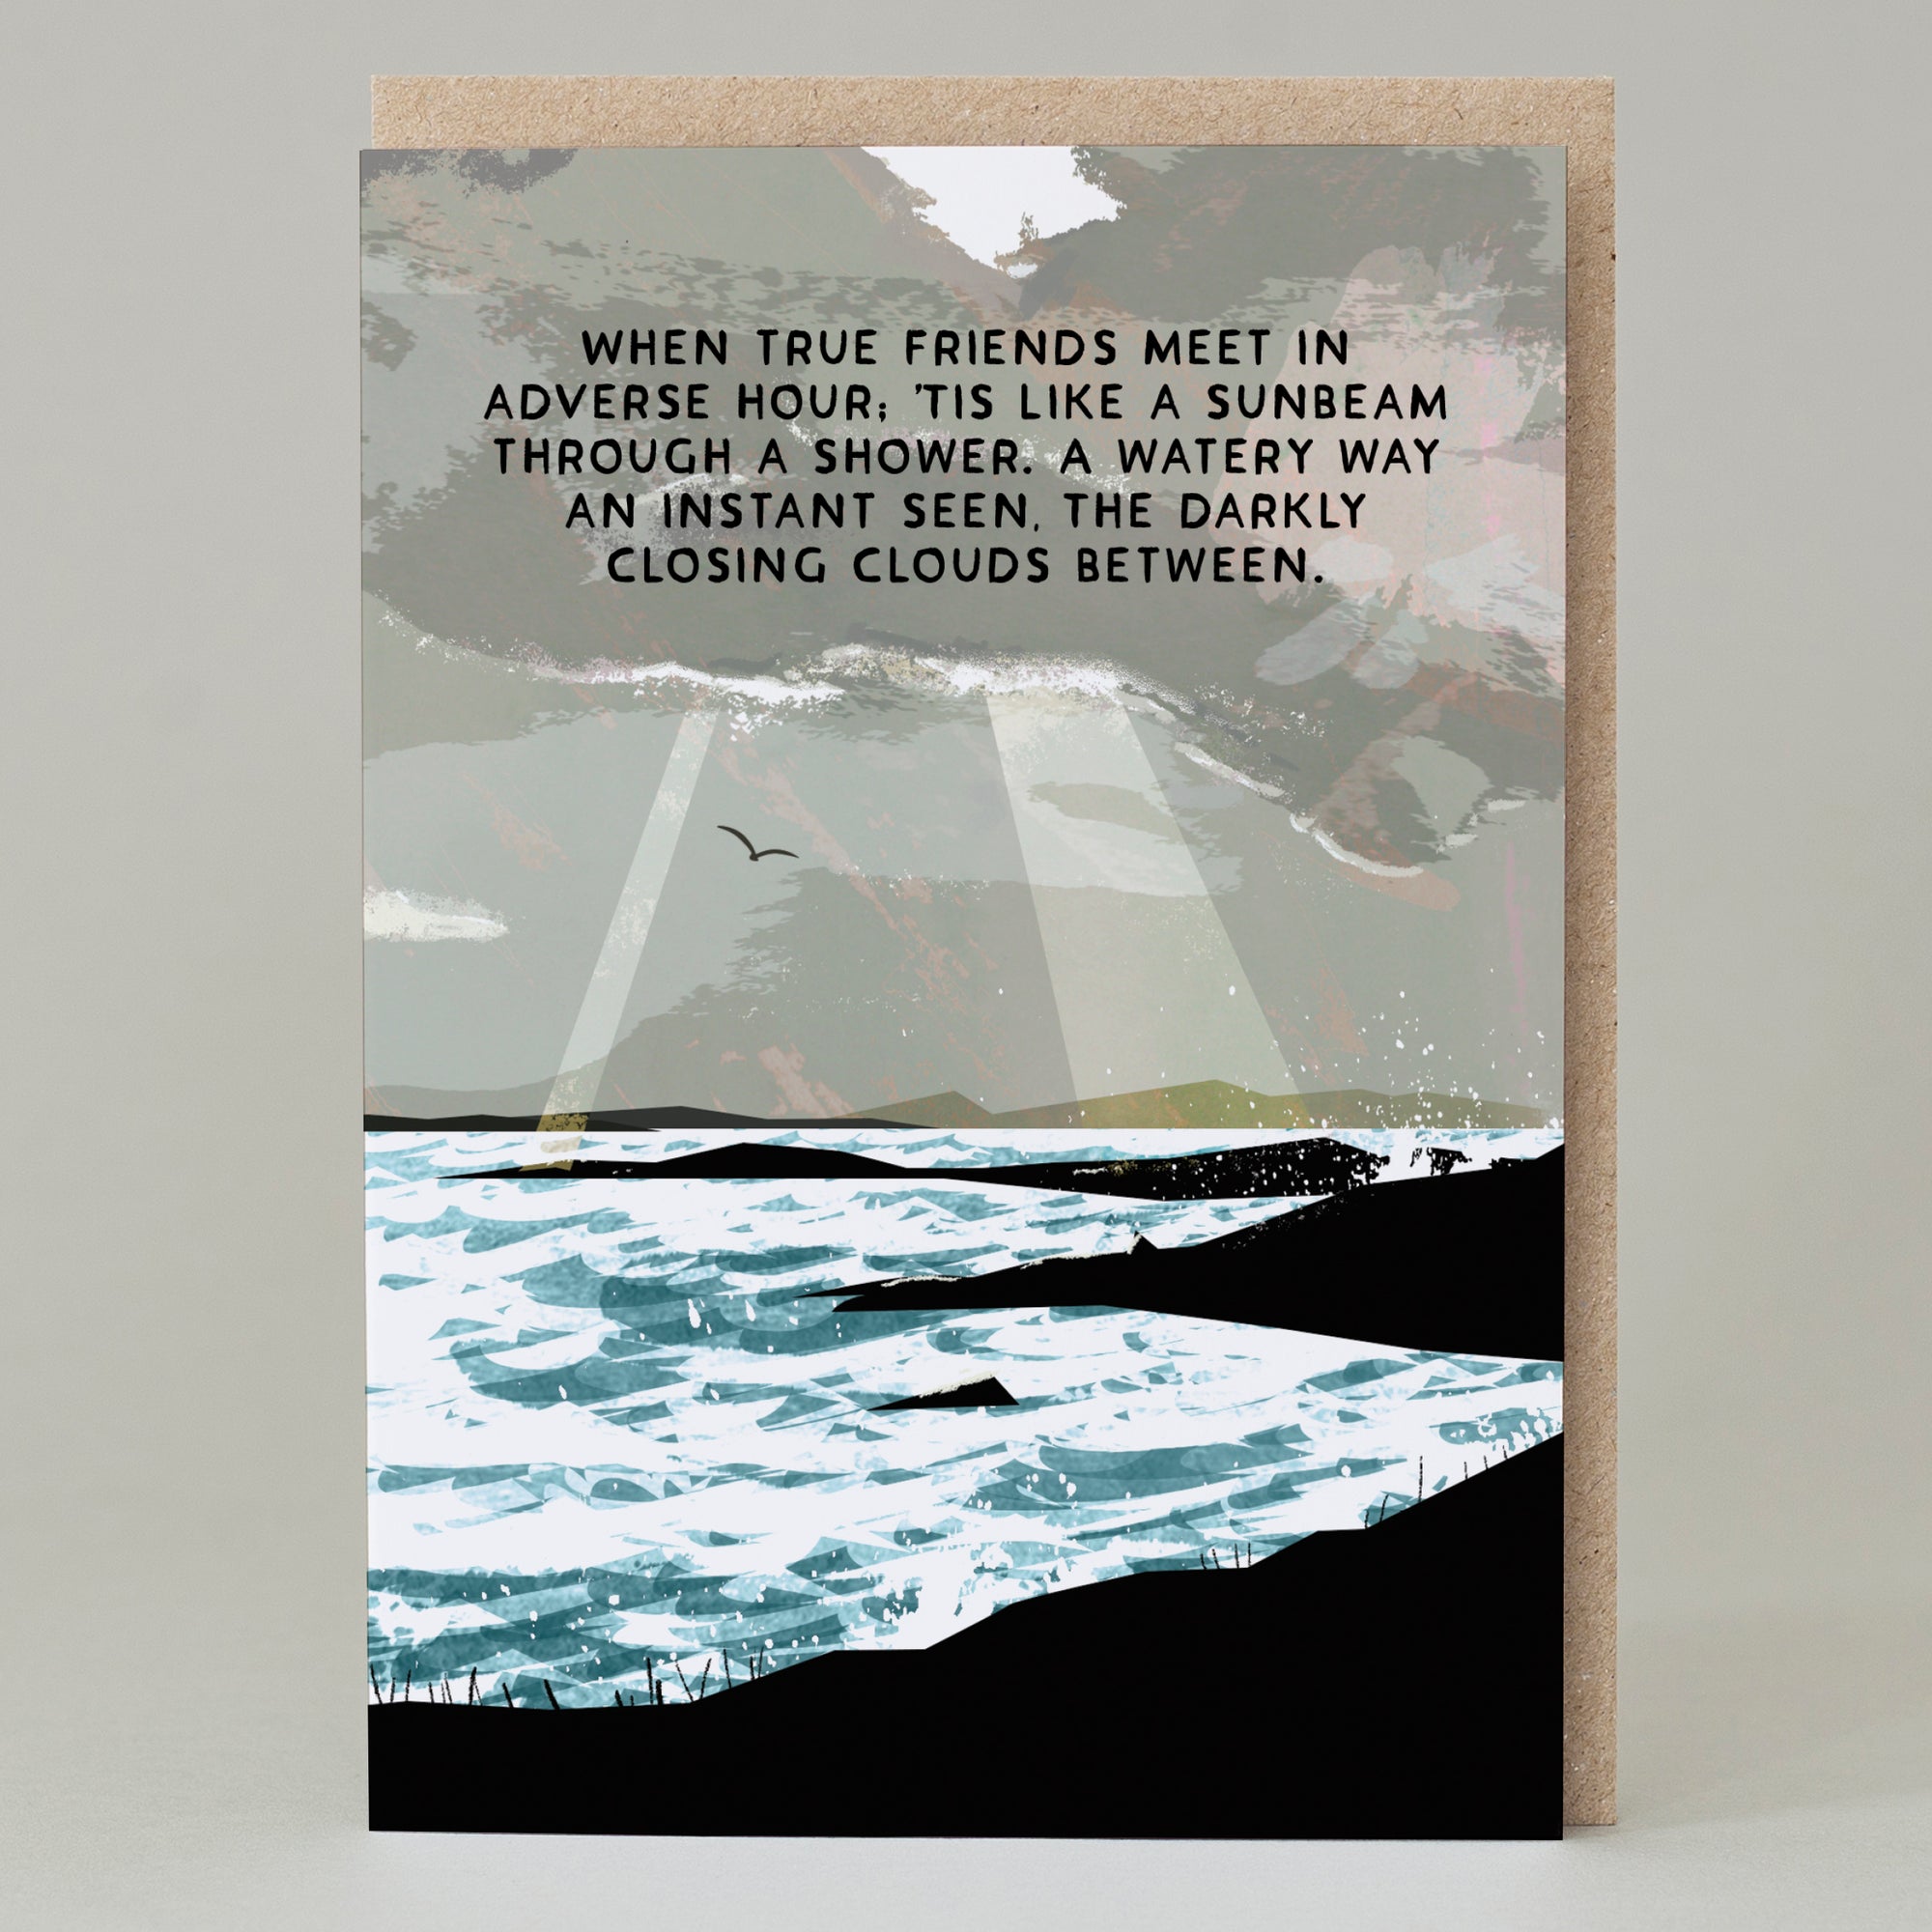 A greetings card with a computer illustrated of a loch, from the shore and a dark raincloud above with sunbeams breaking through. In the middle of the cloud are black capital letters with the Walter Scott words: When true friends meet in adverse hour, tis like a sunbeam through a shower. A watery way an instant seen, the darkly closing clouds between.